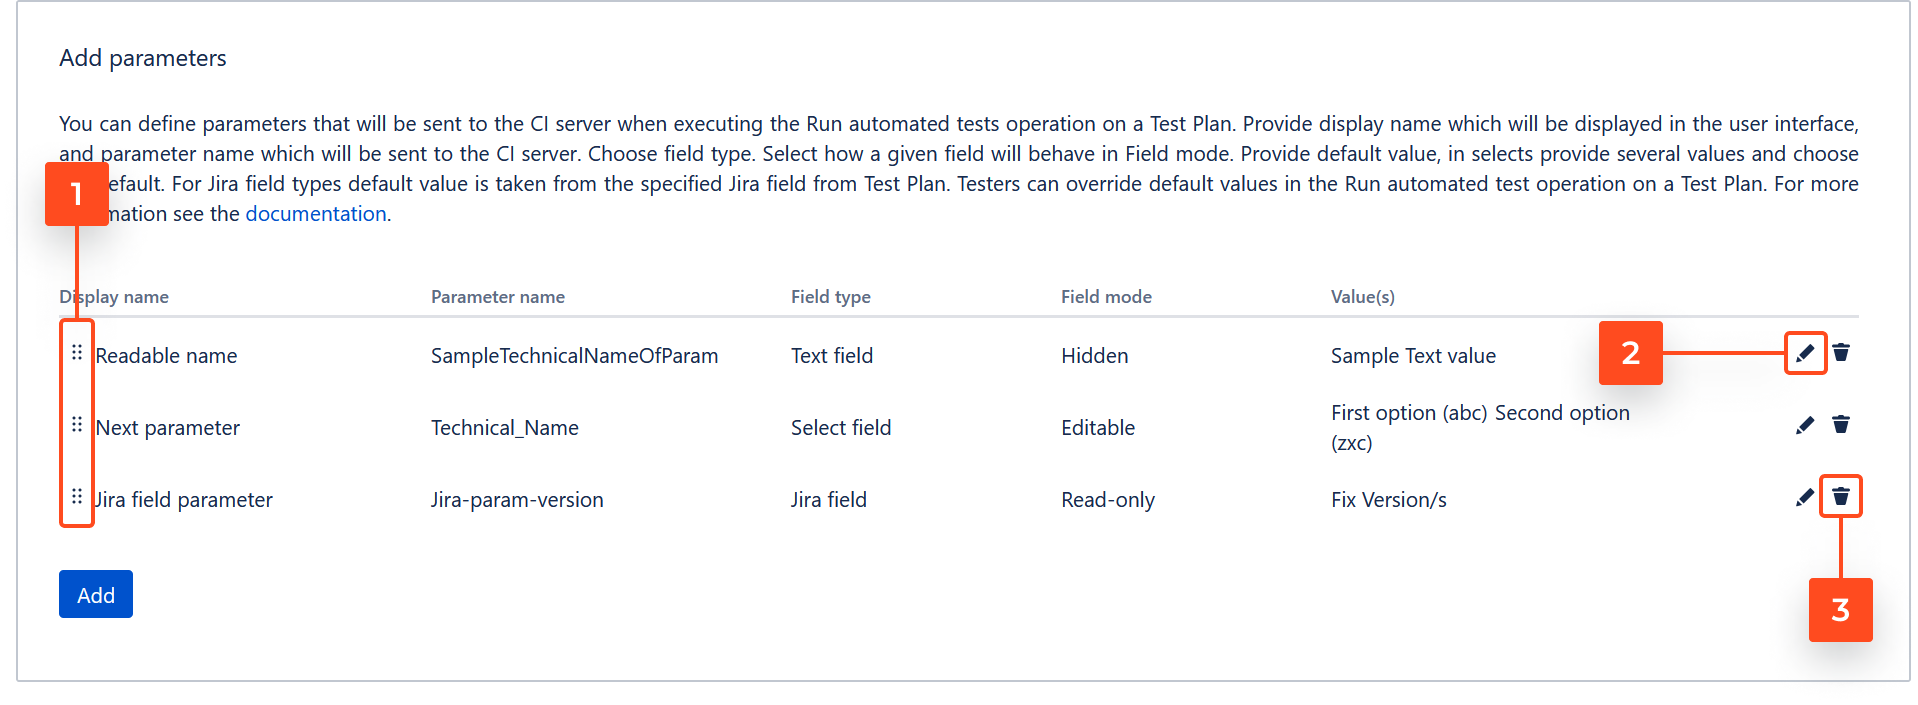 Additional parameters in Run automated tests operation